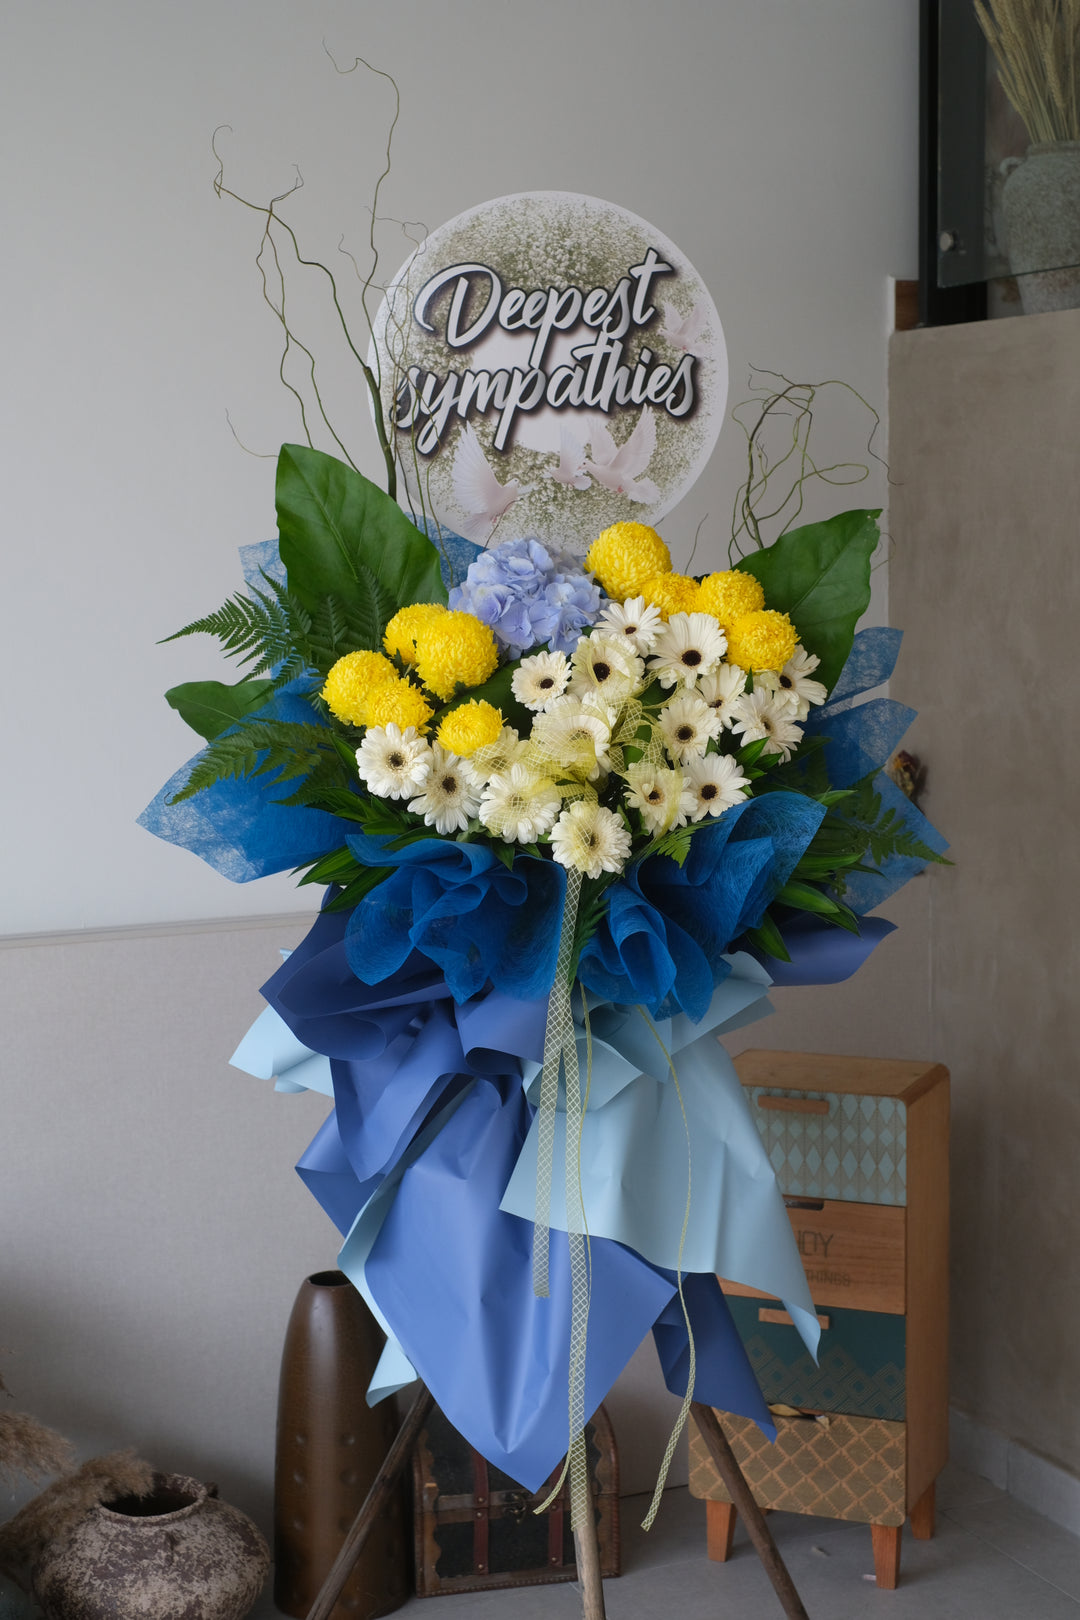 condolences flower penang, flower arrangement, white daisy in blue wrapping paper, yellow pompom with blue hydrangea